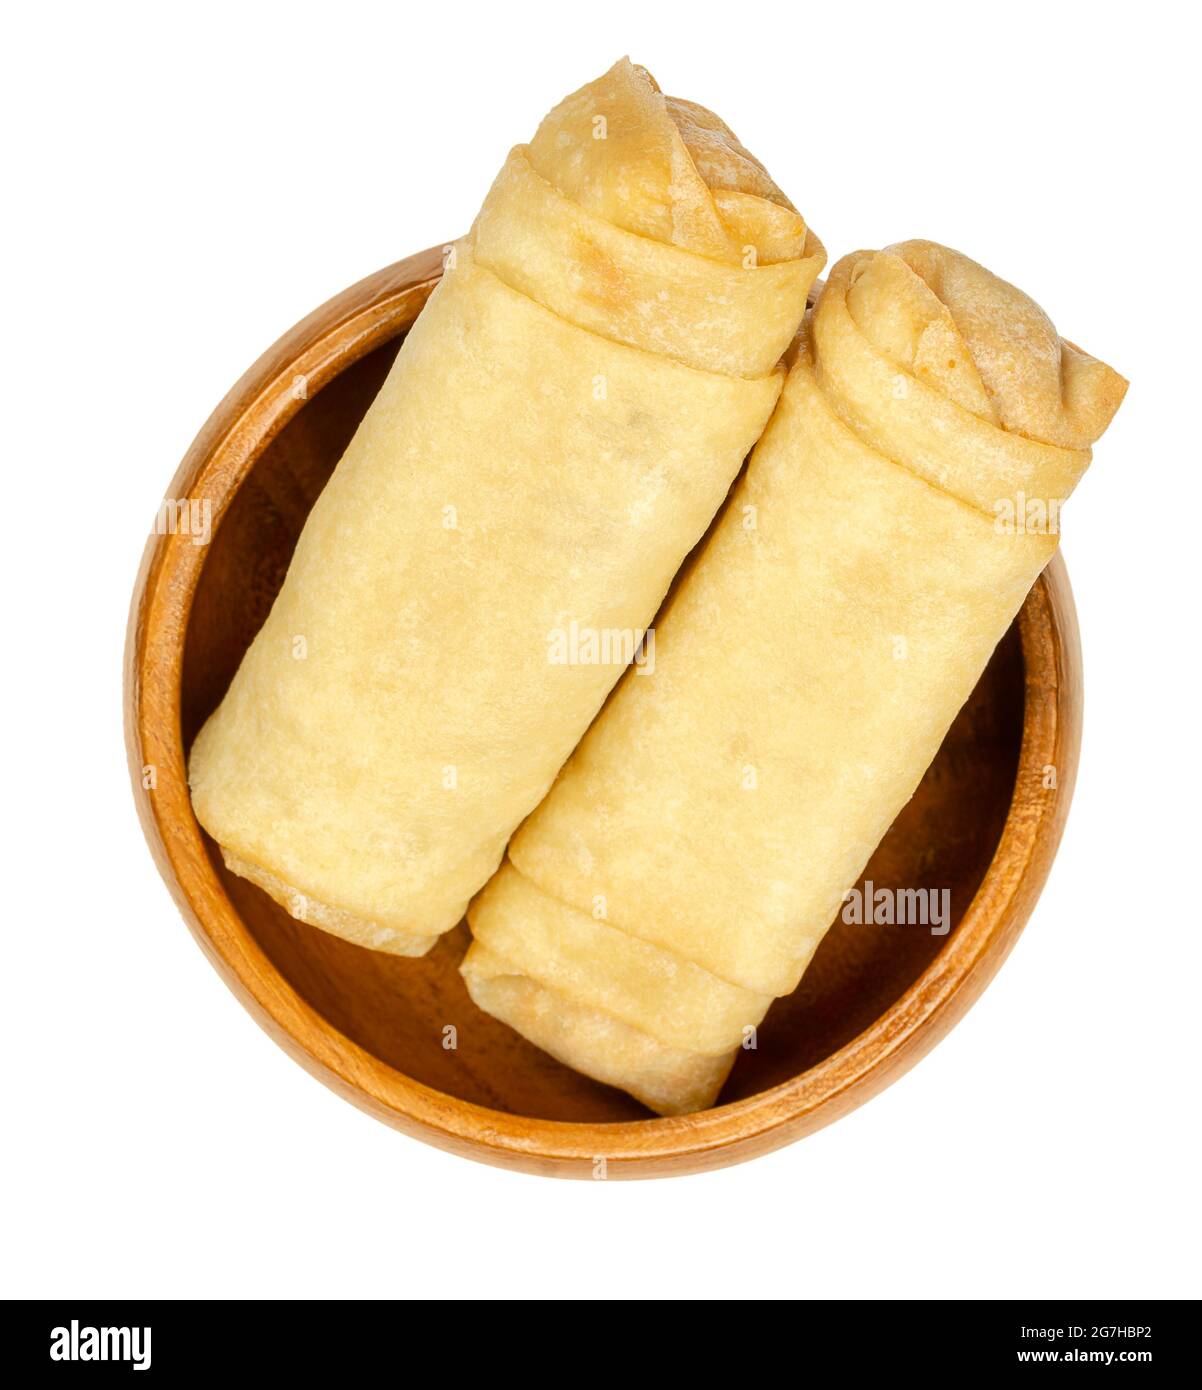 Unfried spring rolls, in a wooden bowl. Two spring rolls, ready to fry. Filled and rolled wrappers, appetizers in Asian cuisine. Close-up, from above. Stock Photo